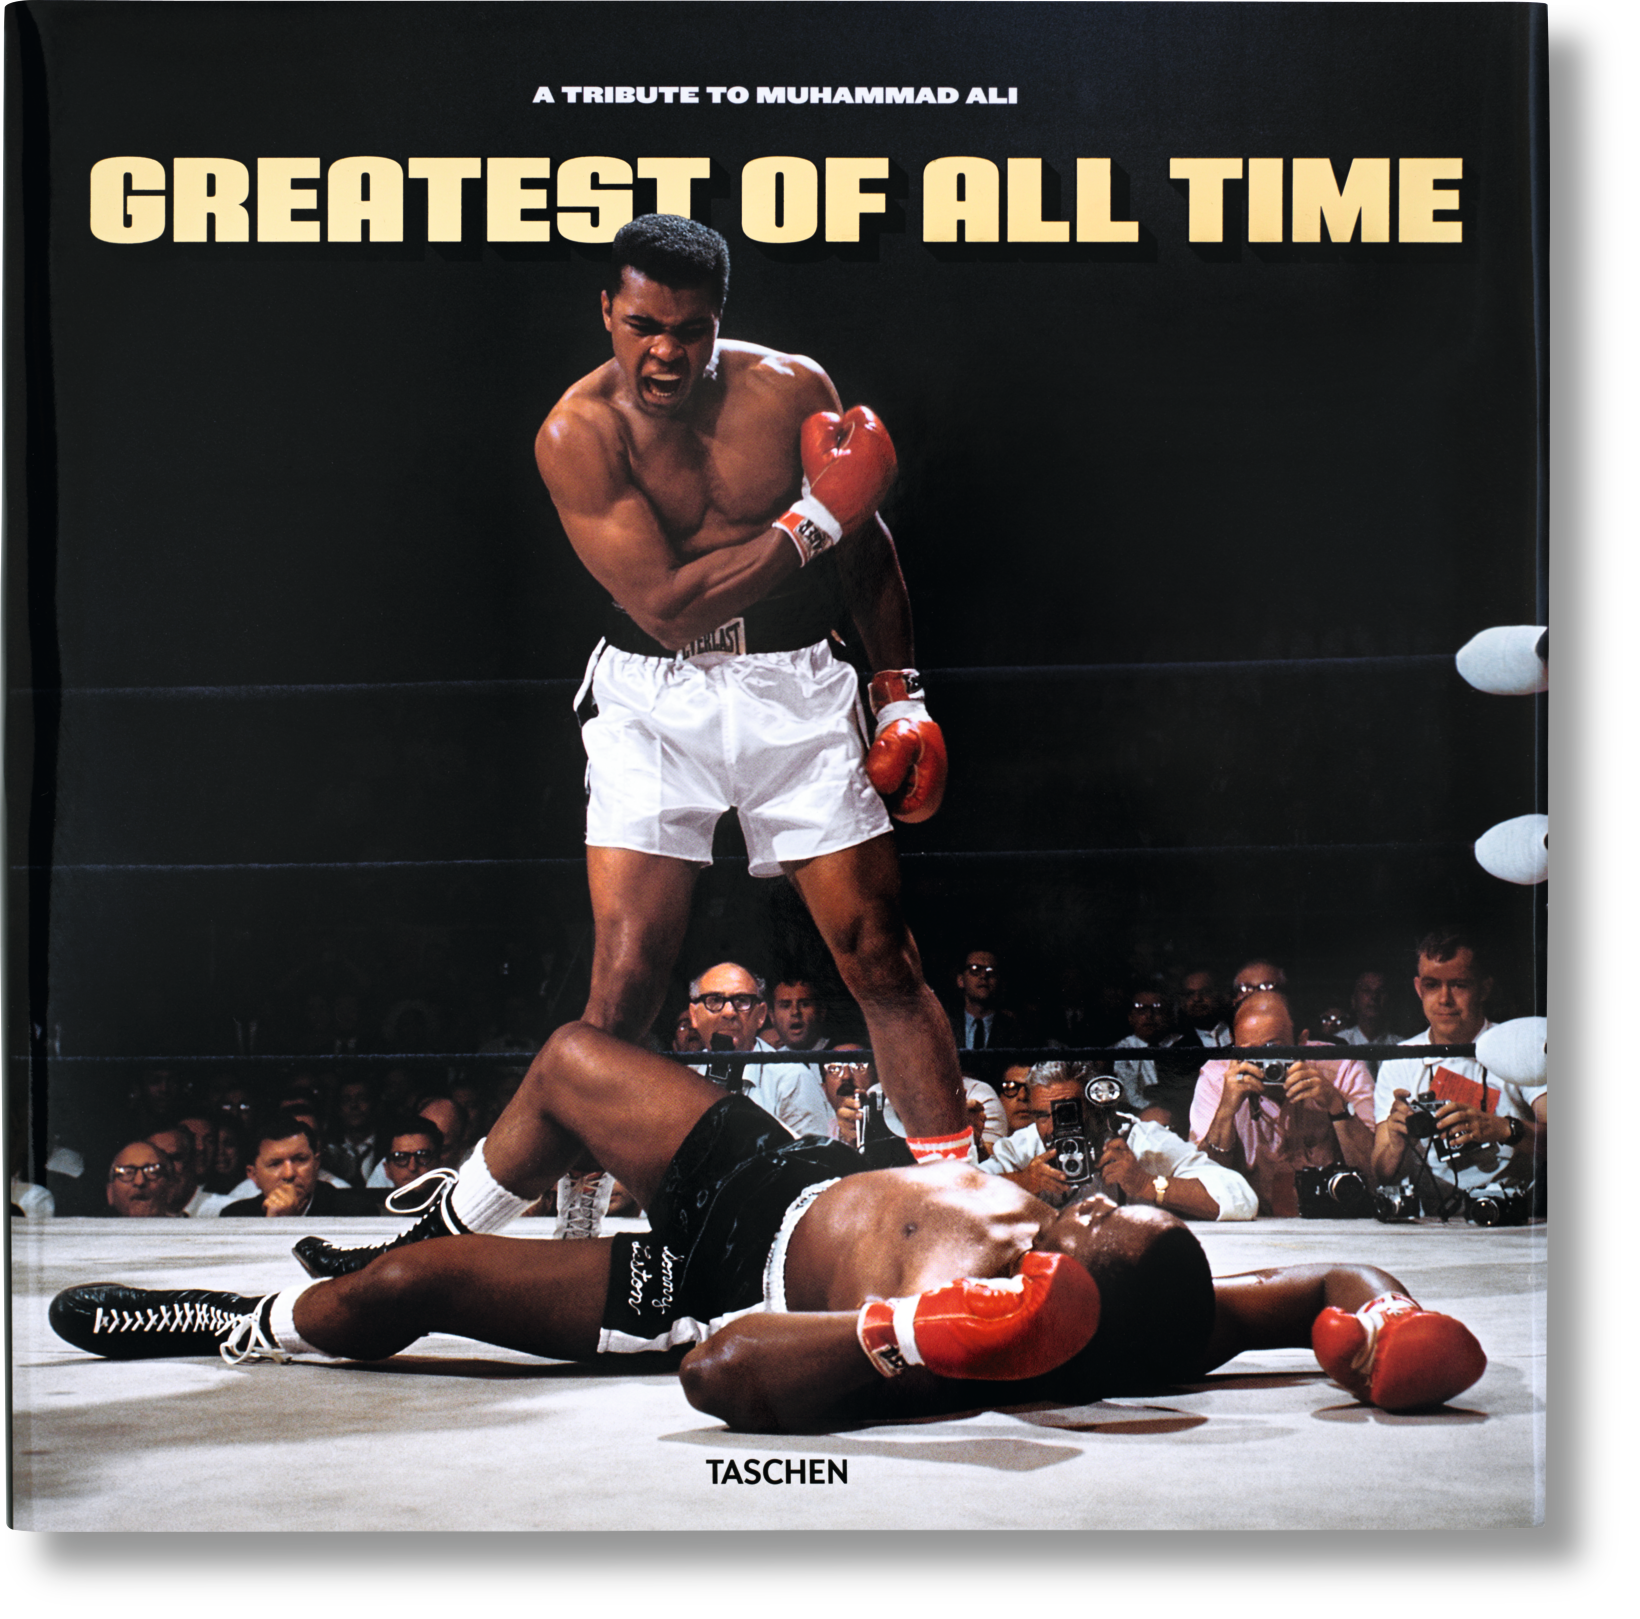 TASCHEN Books: Greatest of All Time. A Tribute to Muhammad Ali